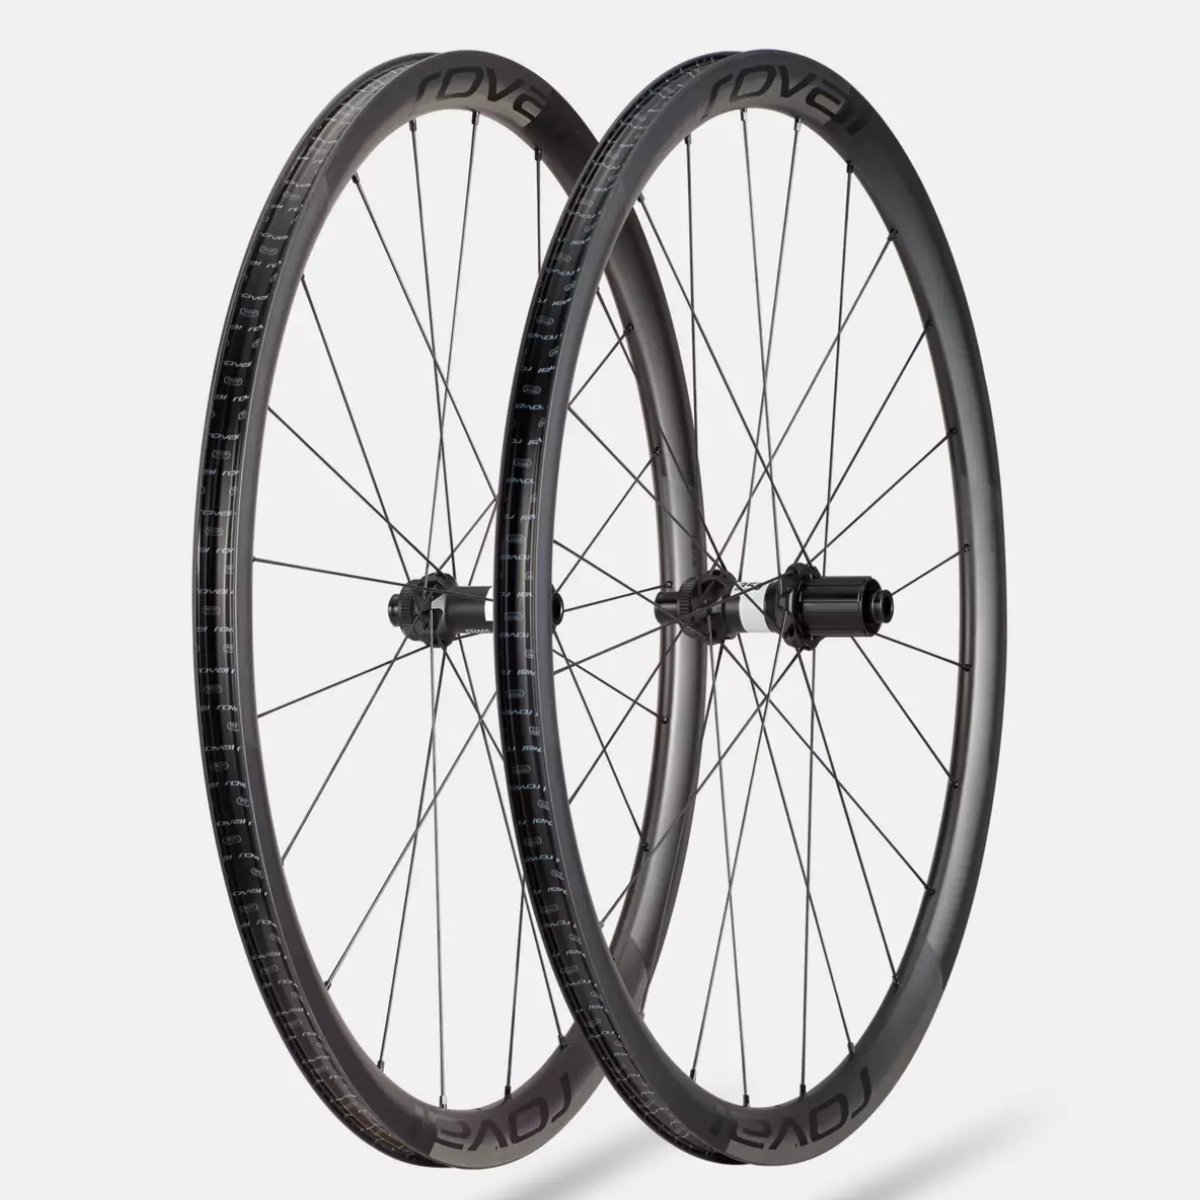 ROUES ROVAL ALPINIST CL DISQUE TUBELESS SHIMANO CARBONE/NOIR PAIRE